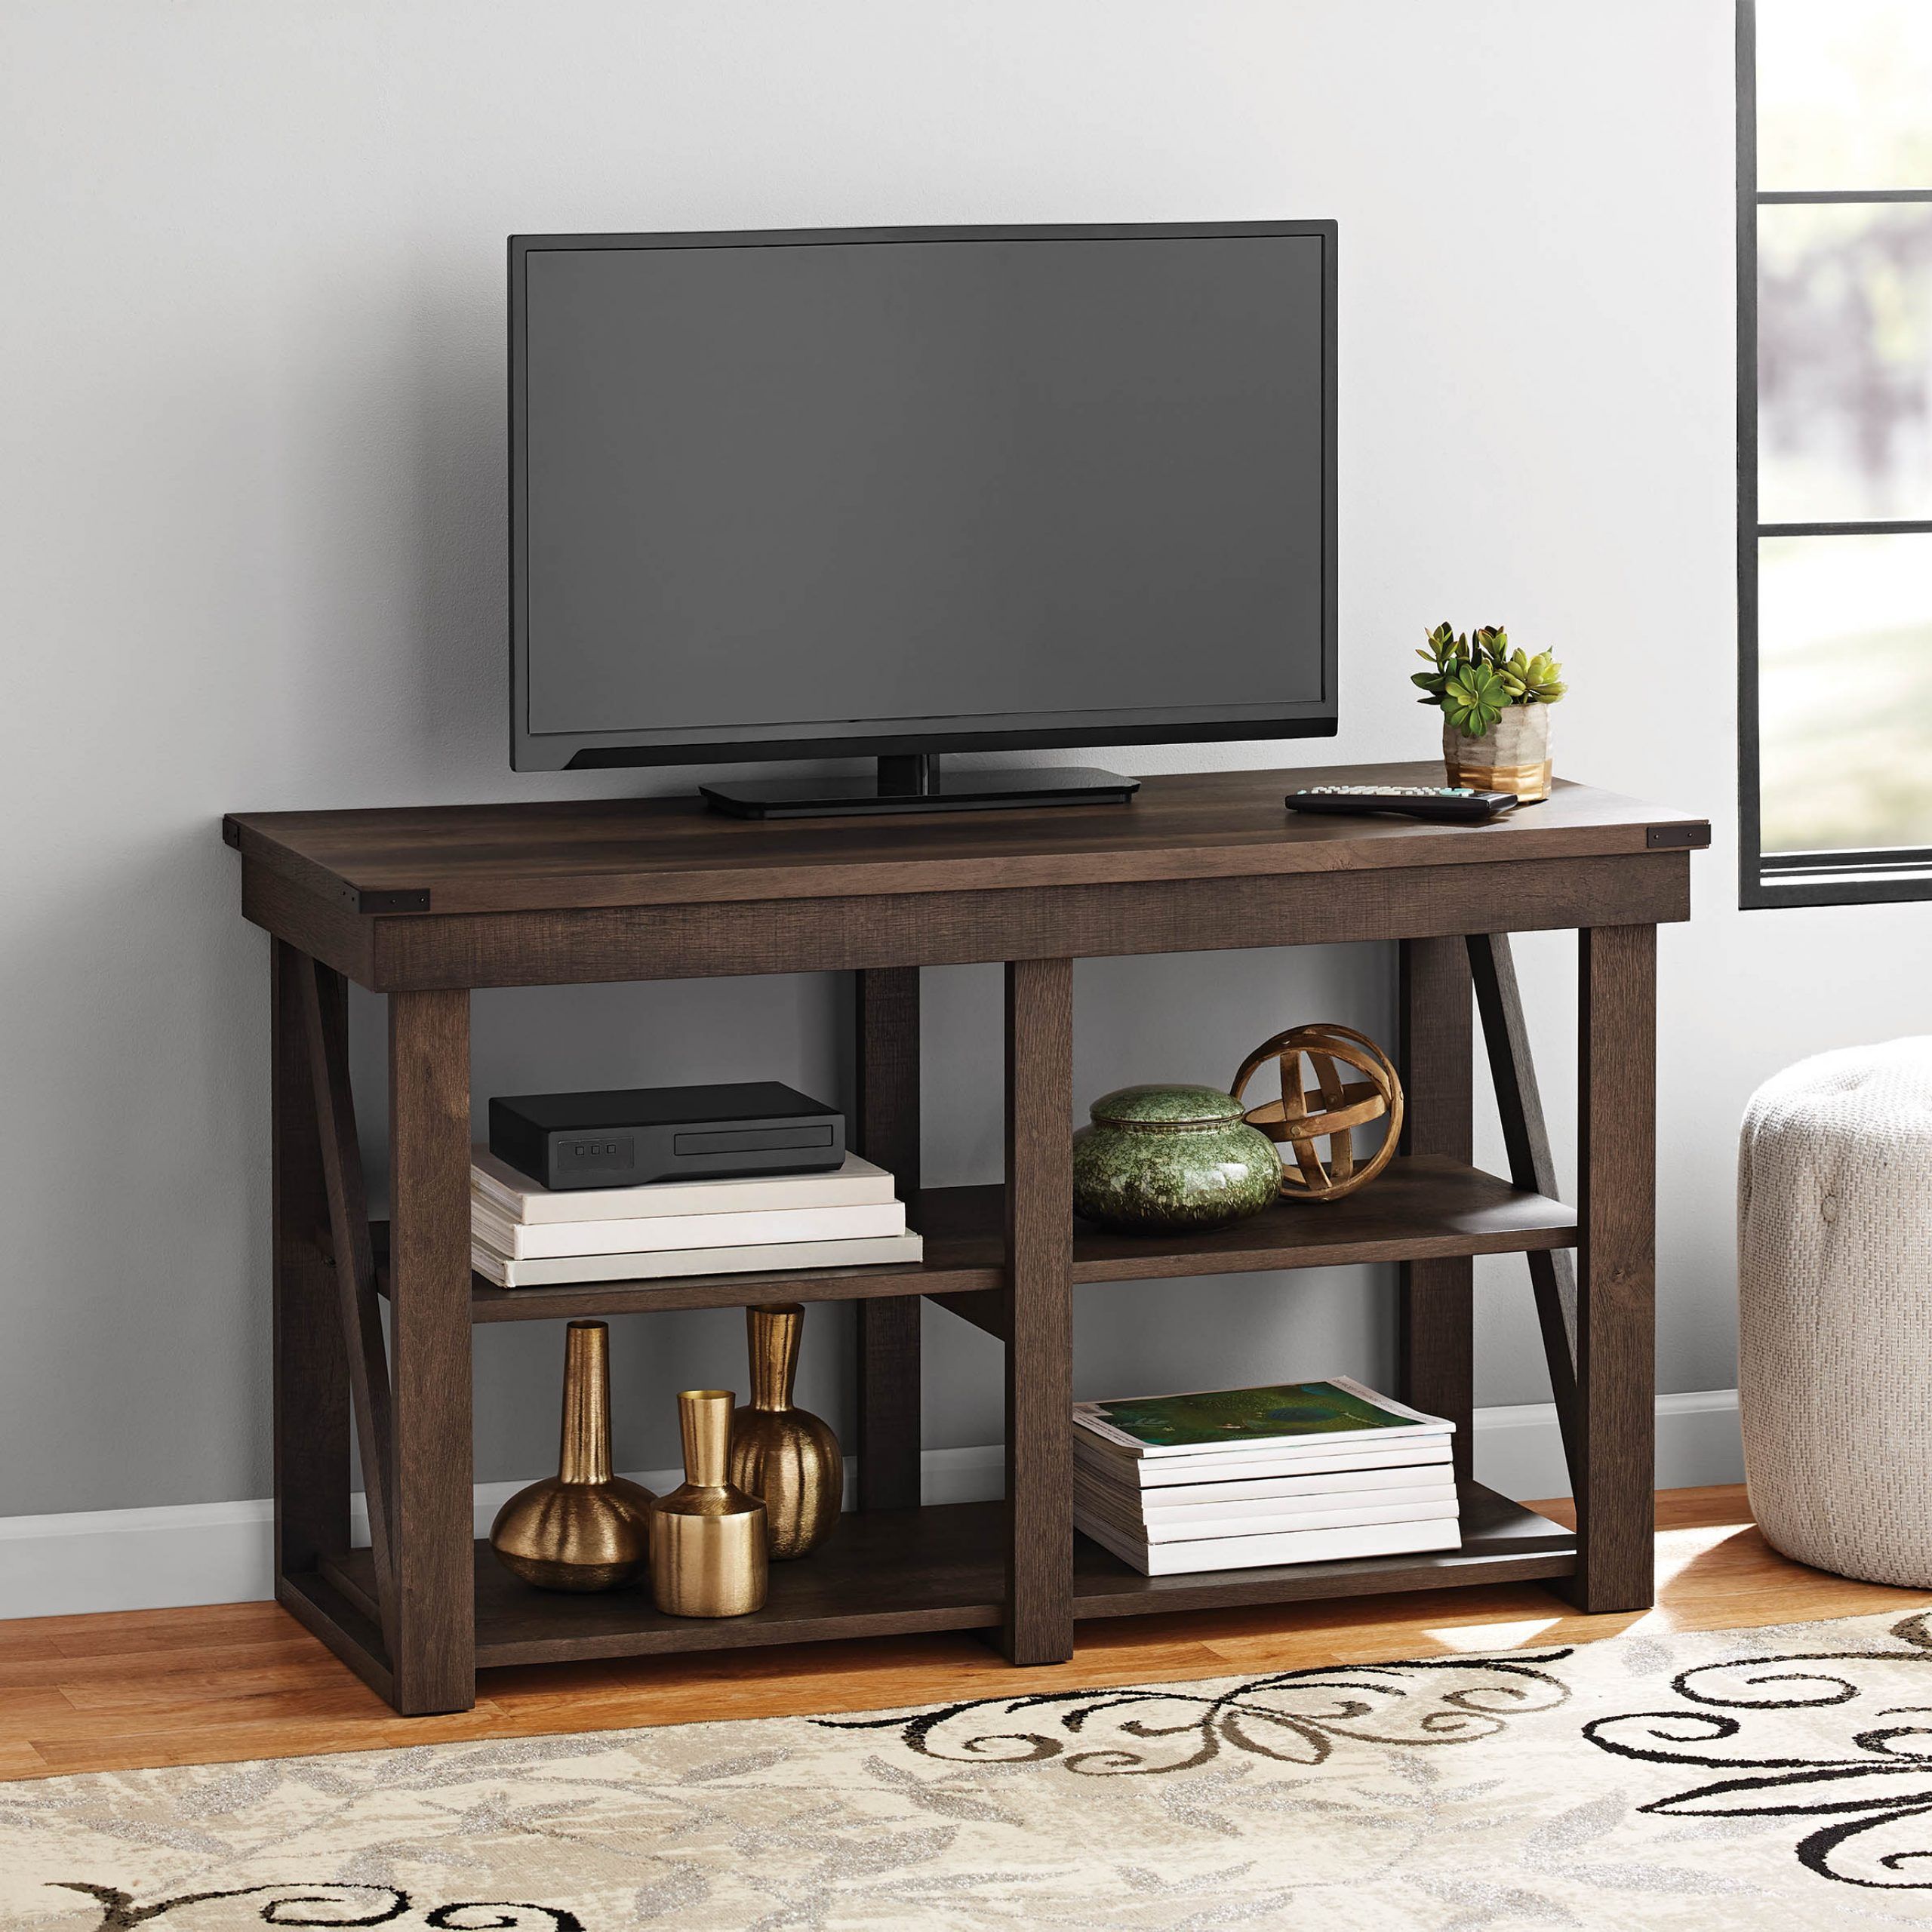 Flat Screen Tv Stand At Walmart — Shermanscreek With Most Popular Whalen Shelf Tv Stands With Floater Mount In Weathered Dark Pine Finish (Photo 3 of 10)